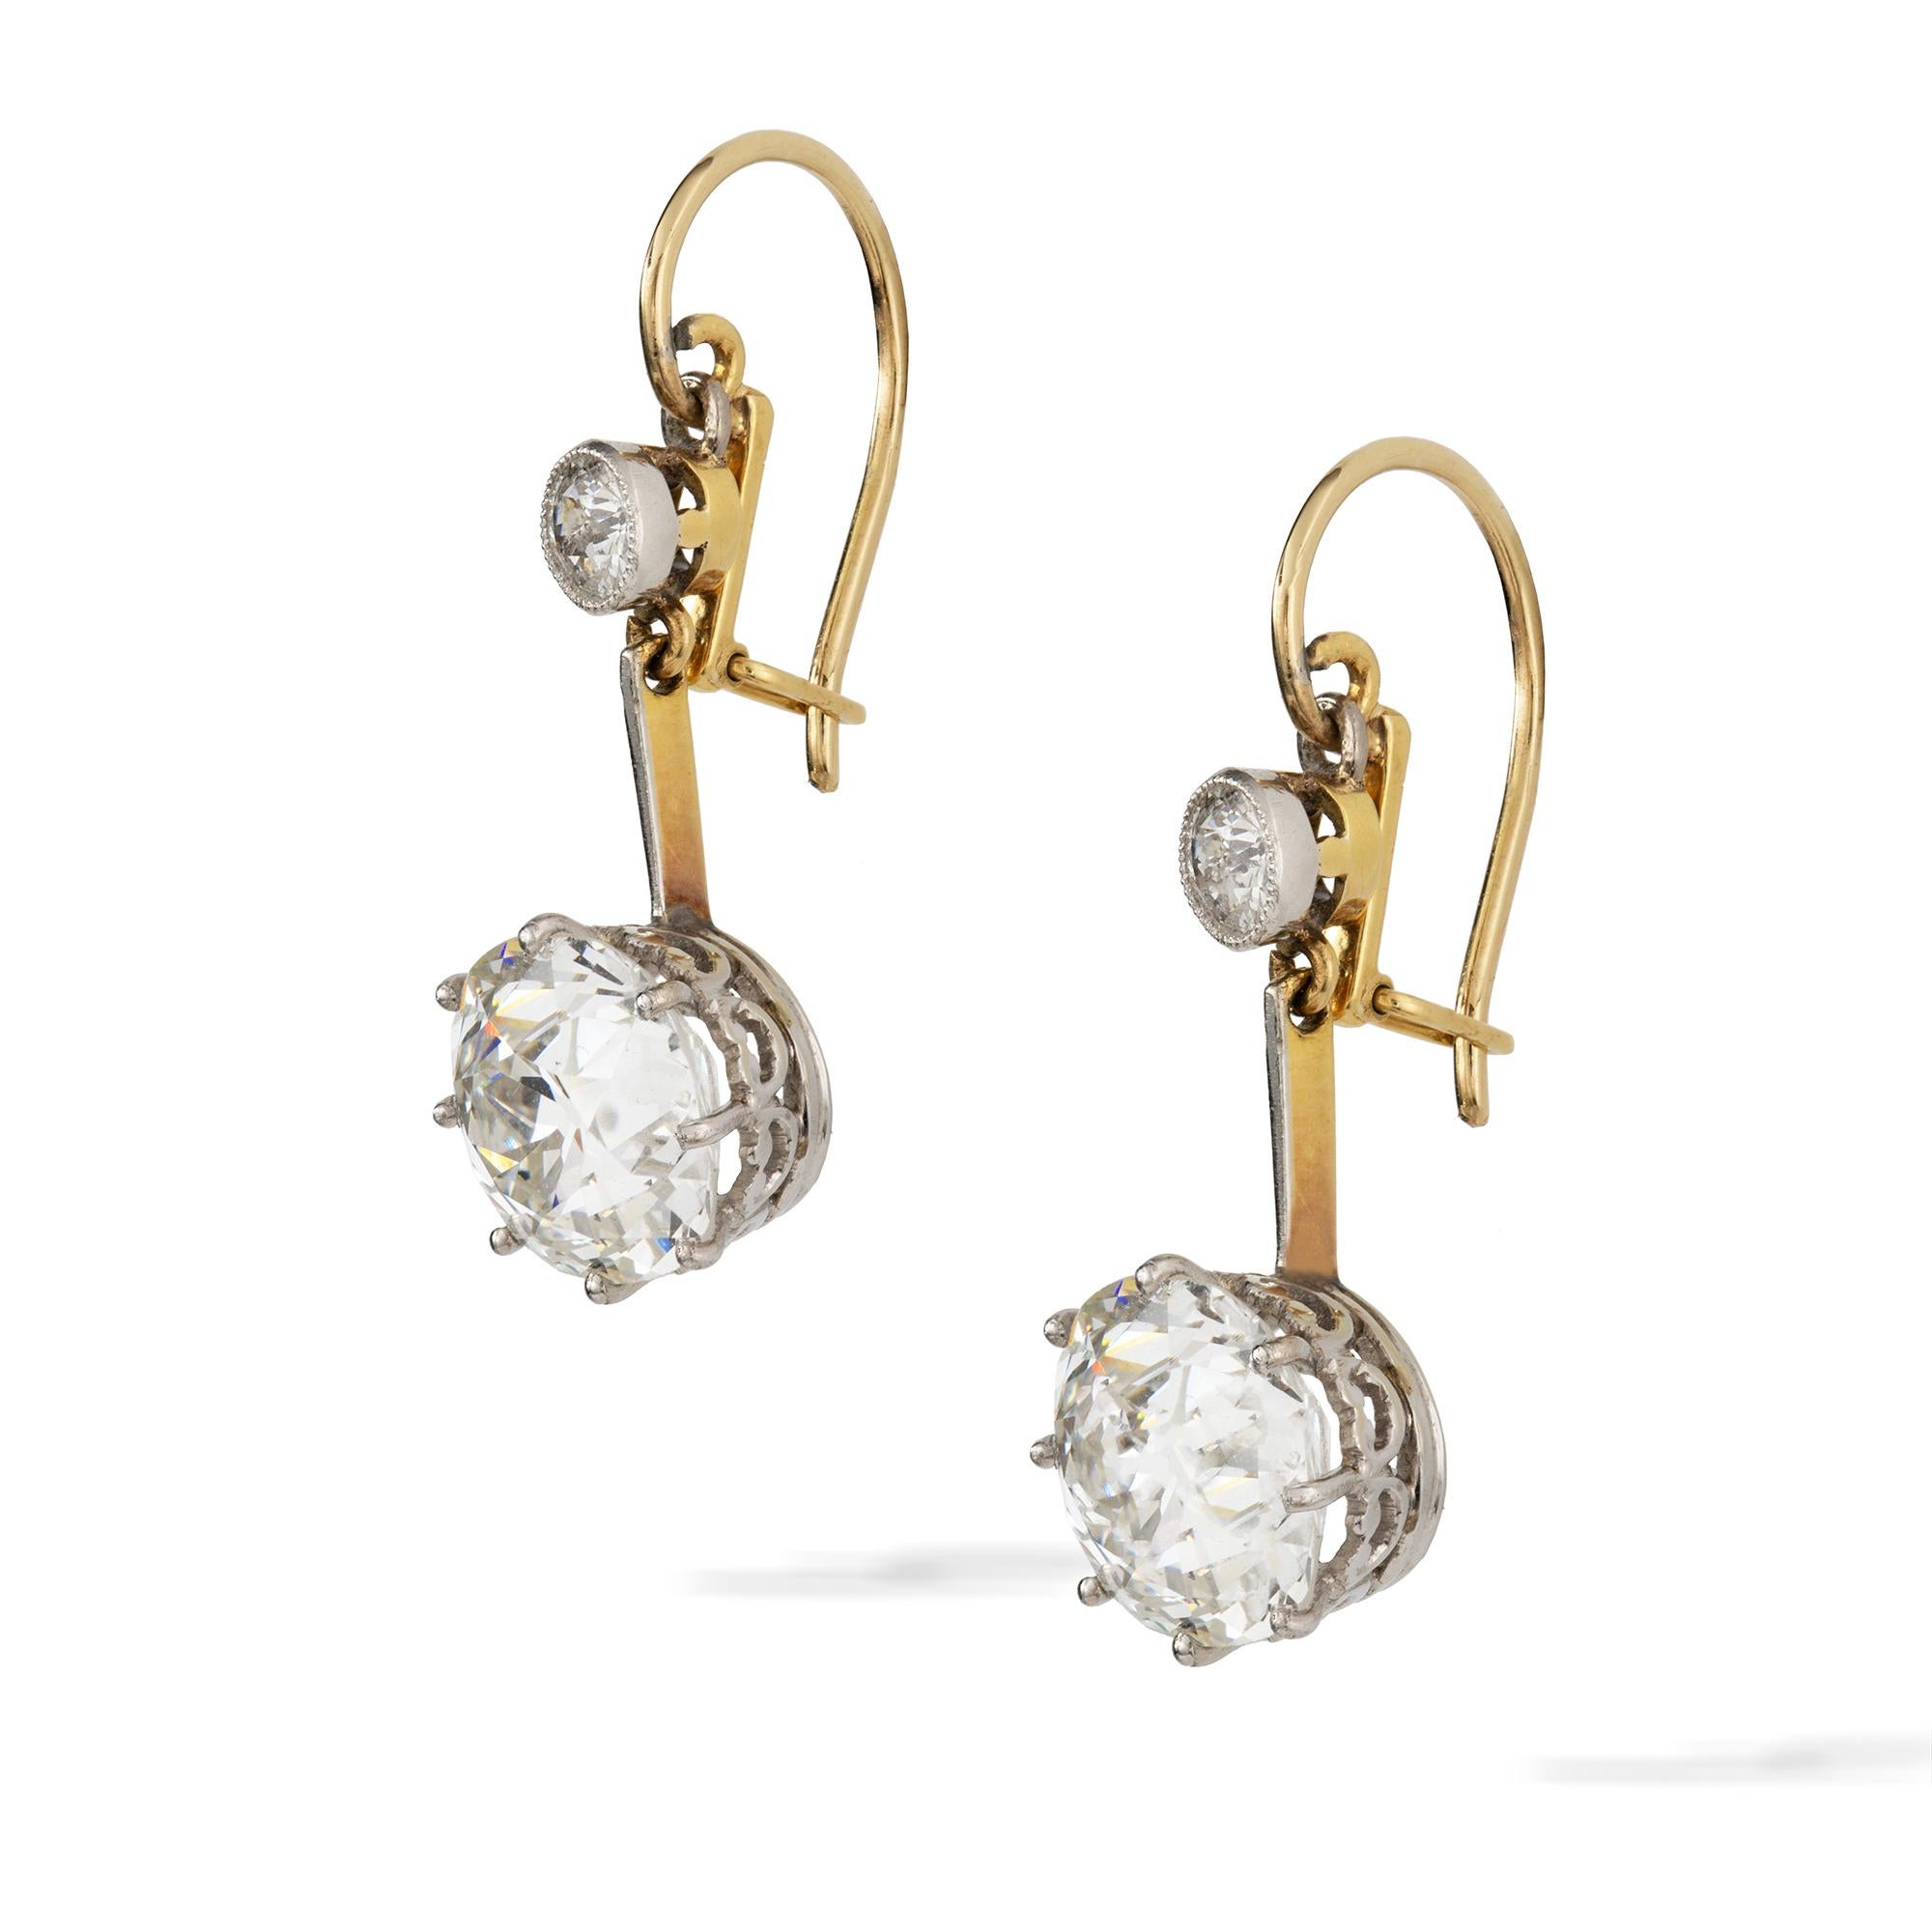 A pair of late Victorian diamond drop earrings, the old-cut diamonds, weighing 3.14 and 3.23 carats, respectively H colour VS1 and H colour SI1, accompanied by De Beers Report , each eight claw-set to a platinum scroll collet, suspended from a